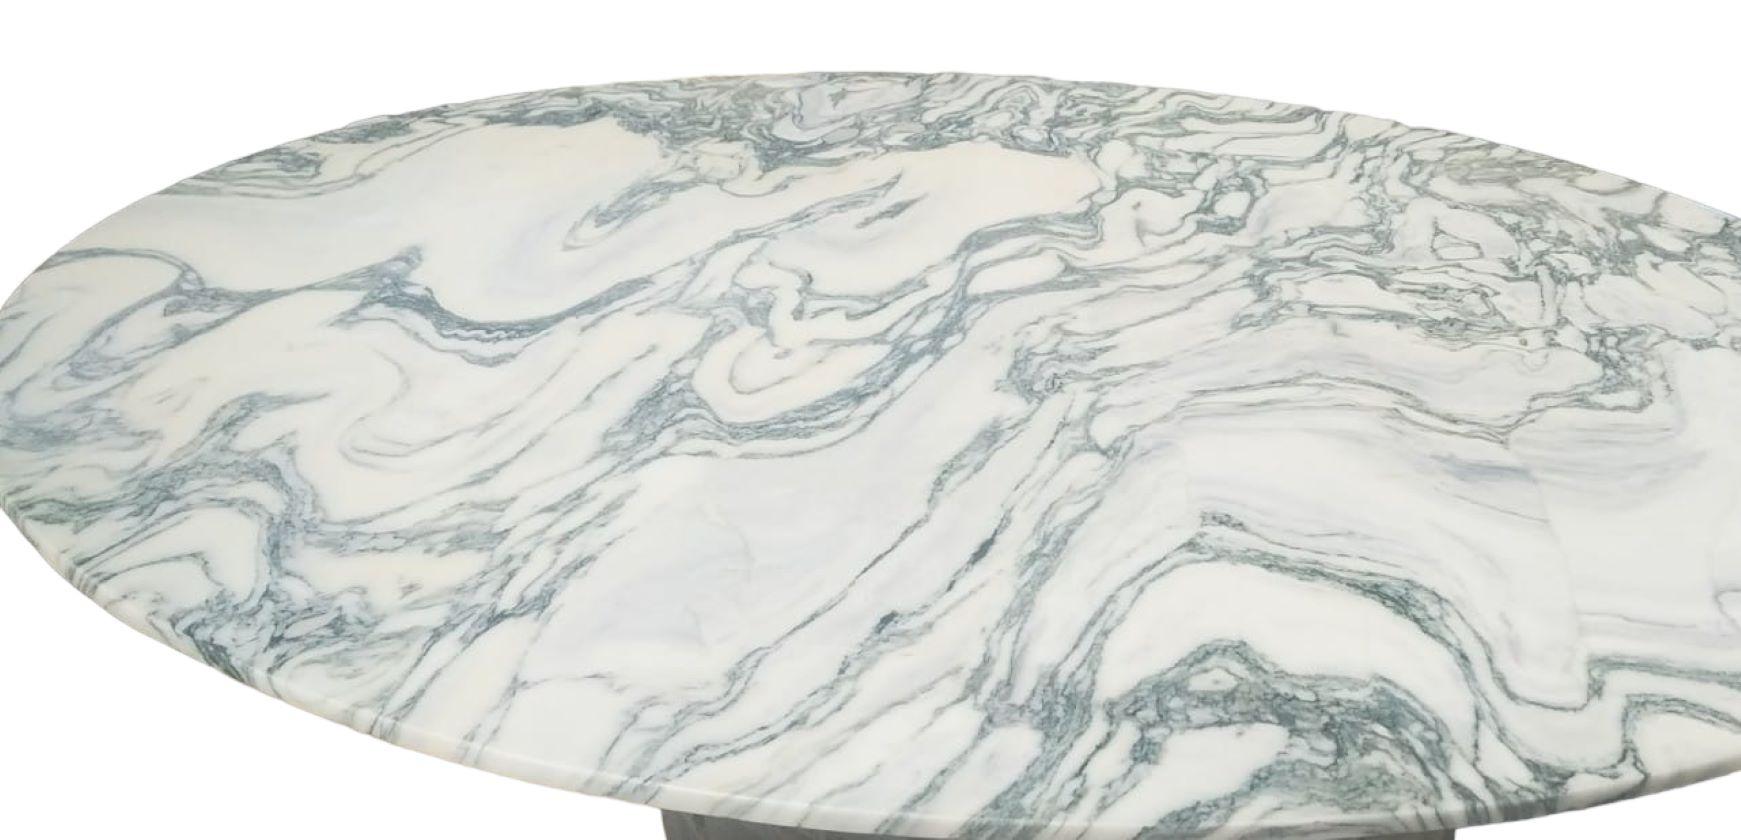 Art Deco style marble travertine stone tables

We can color match marbles to your project
From dining tables to occasional end or coffee table ideas.
Custom sizing available copying designer influences.

Price is a guide only.
 